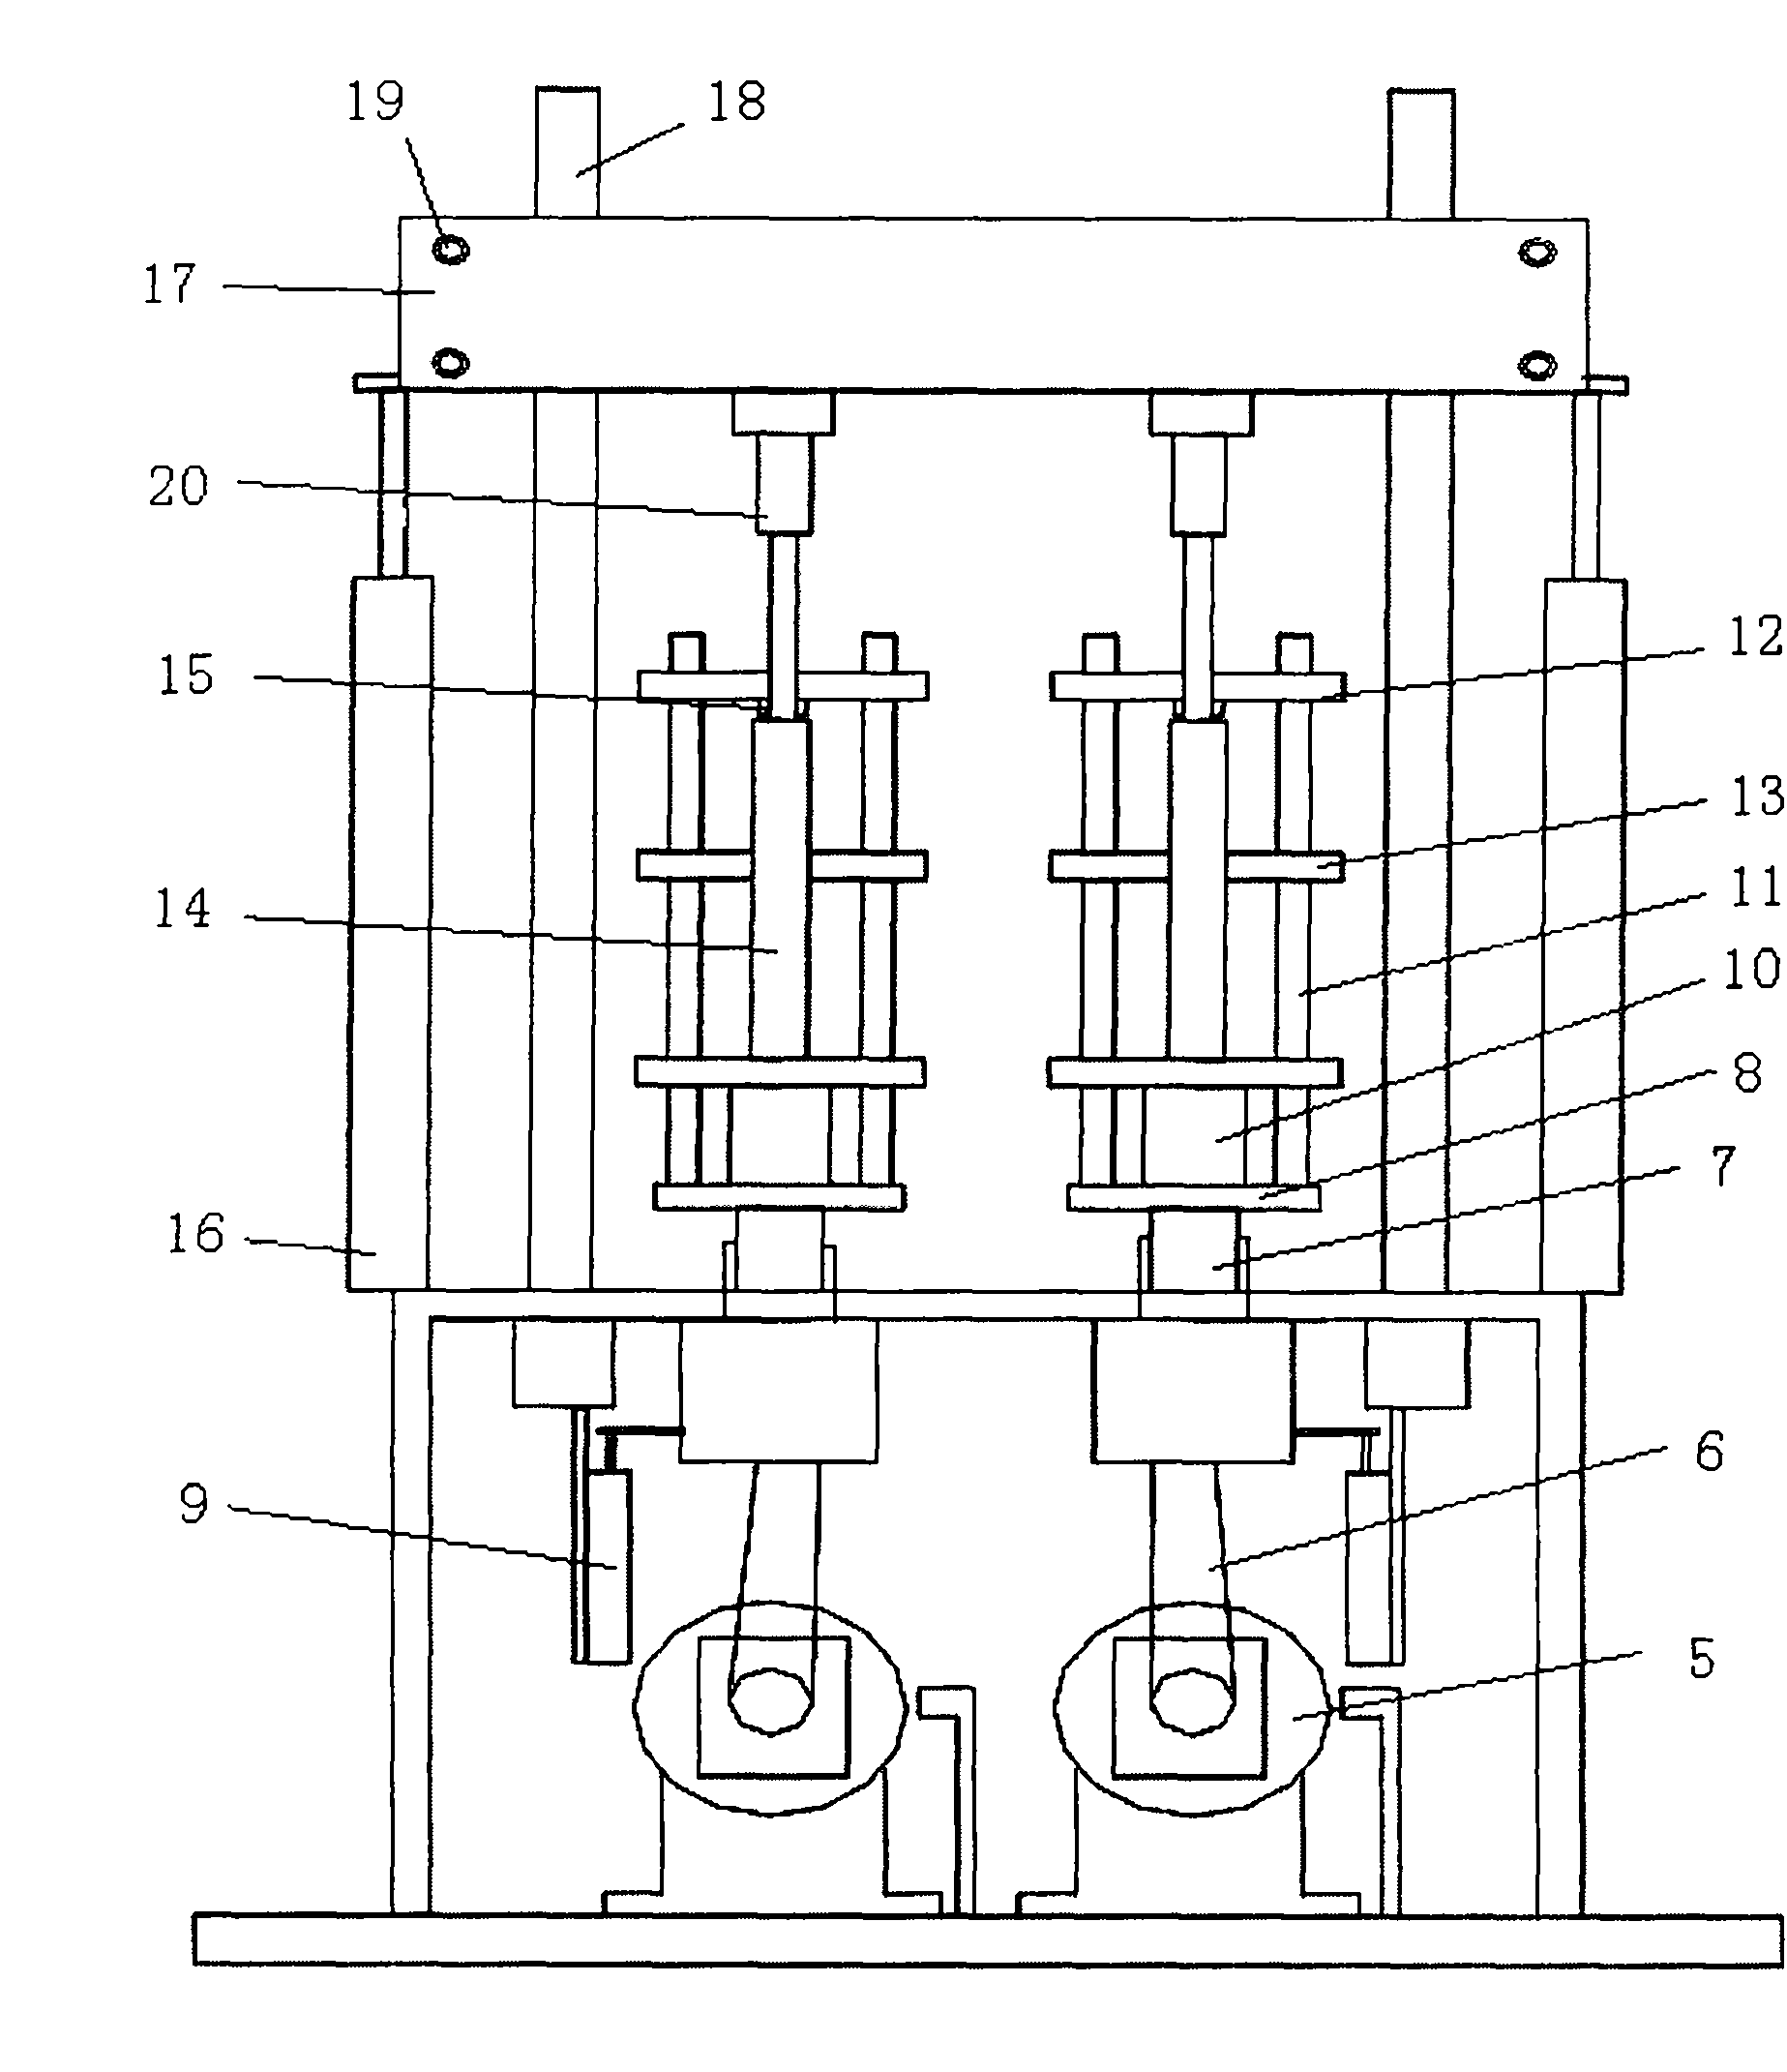 Double-station and multispeed indicator of vehicle damper